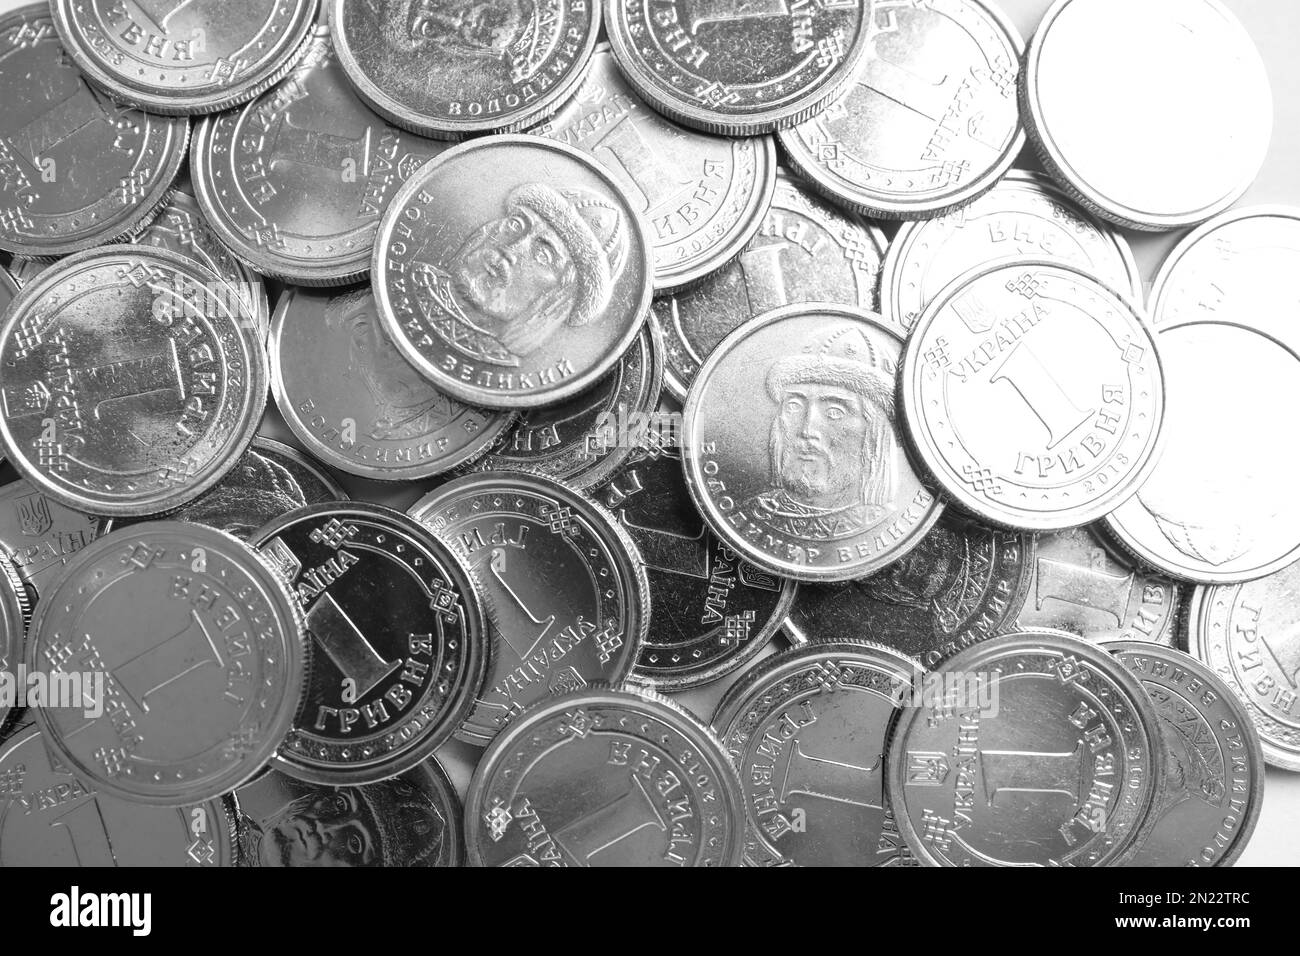 Many Ukrainian coins as background, top view. National currency Stock Photo